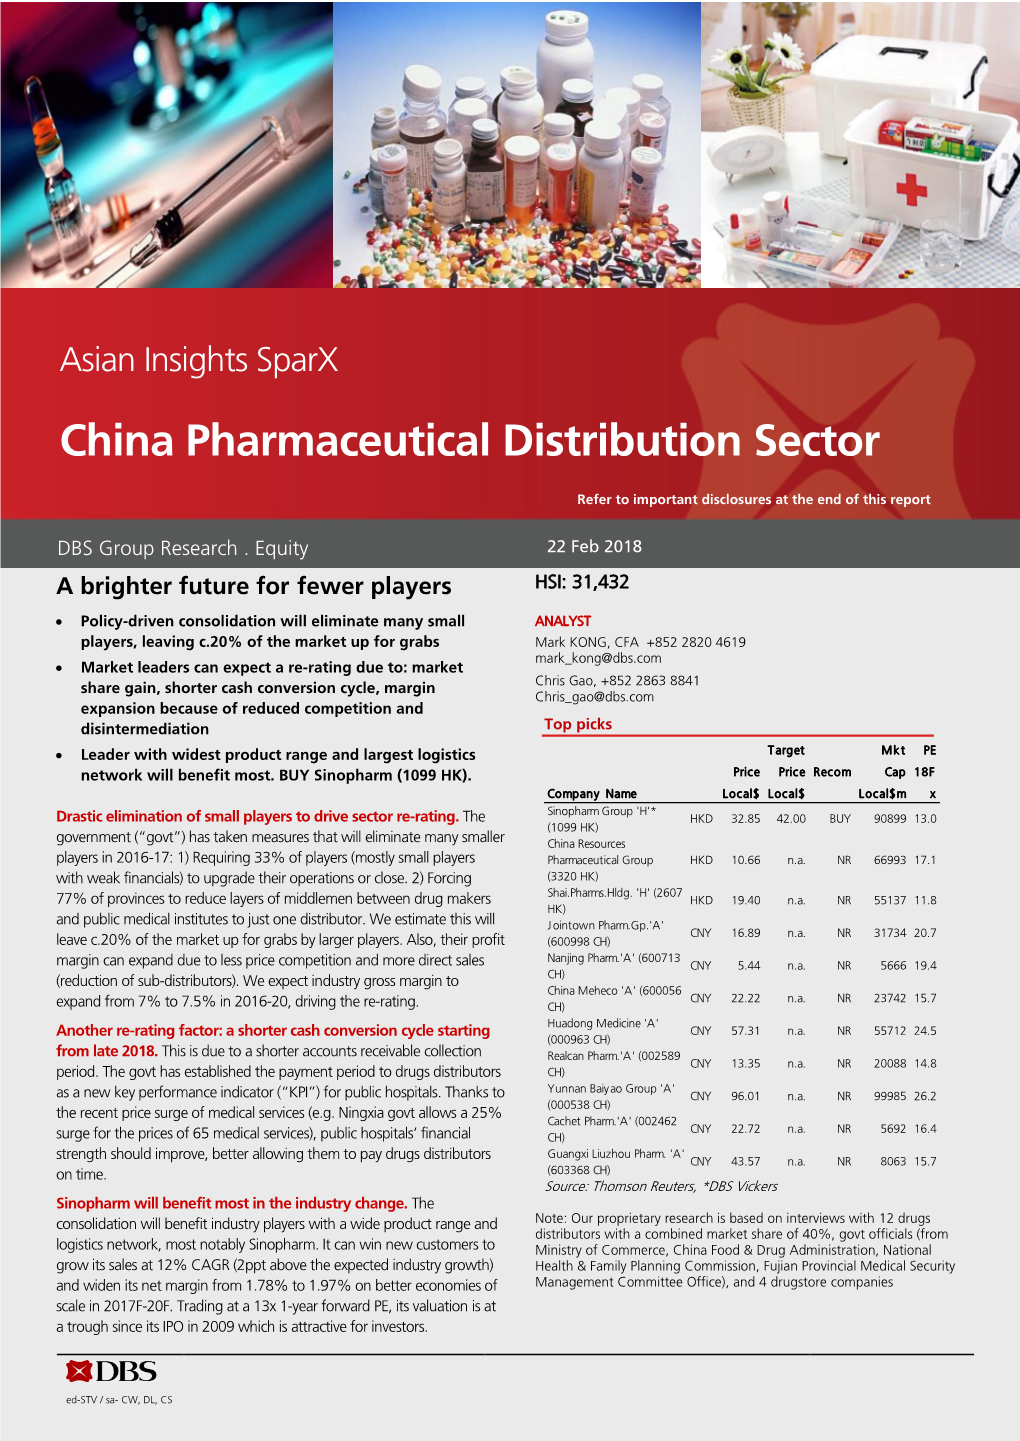 Asian Insights Sparx Pharmaceutical Distribution Sector